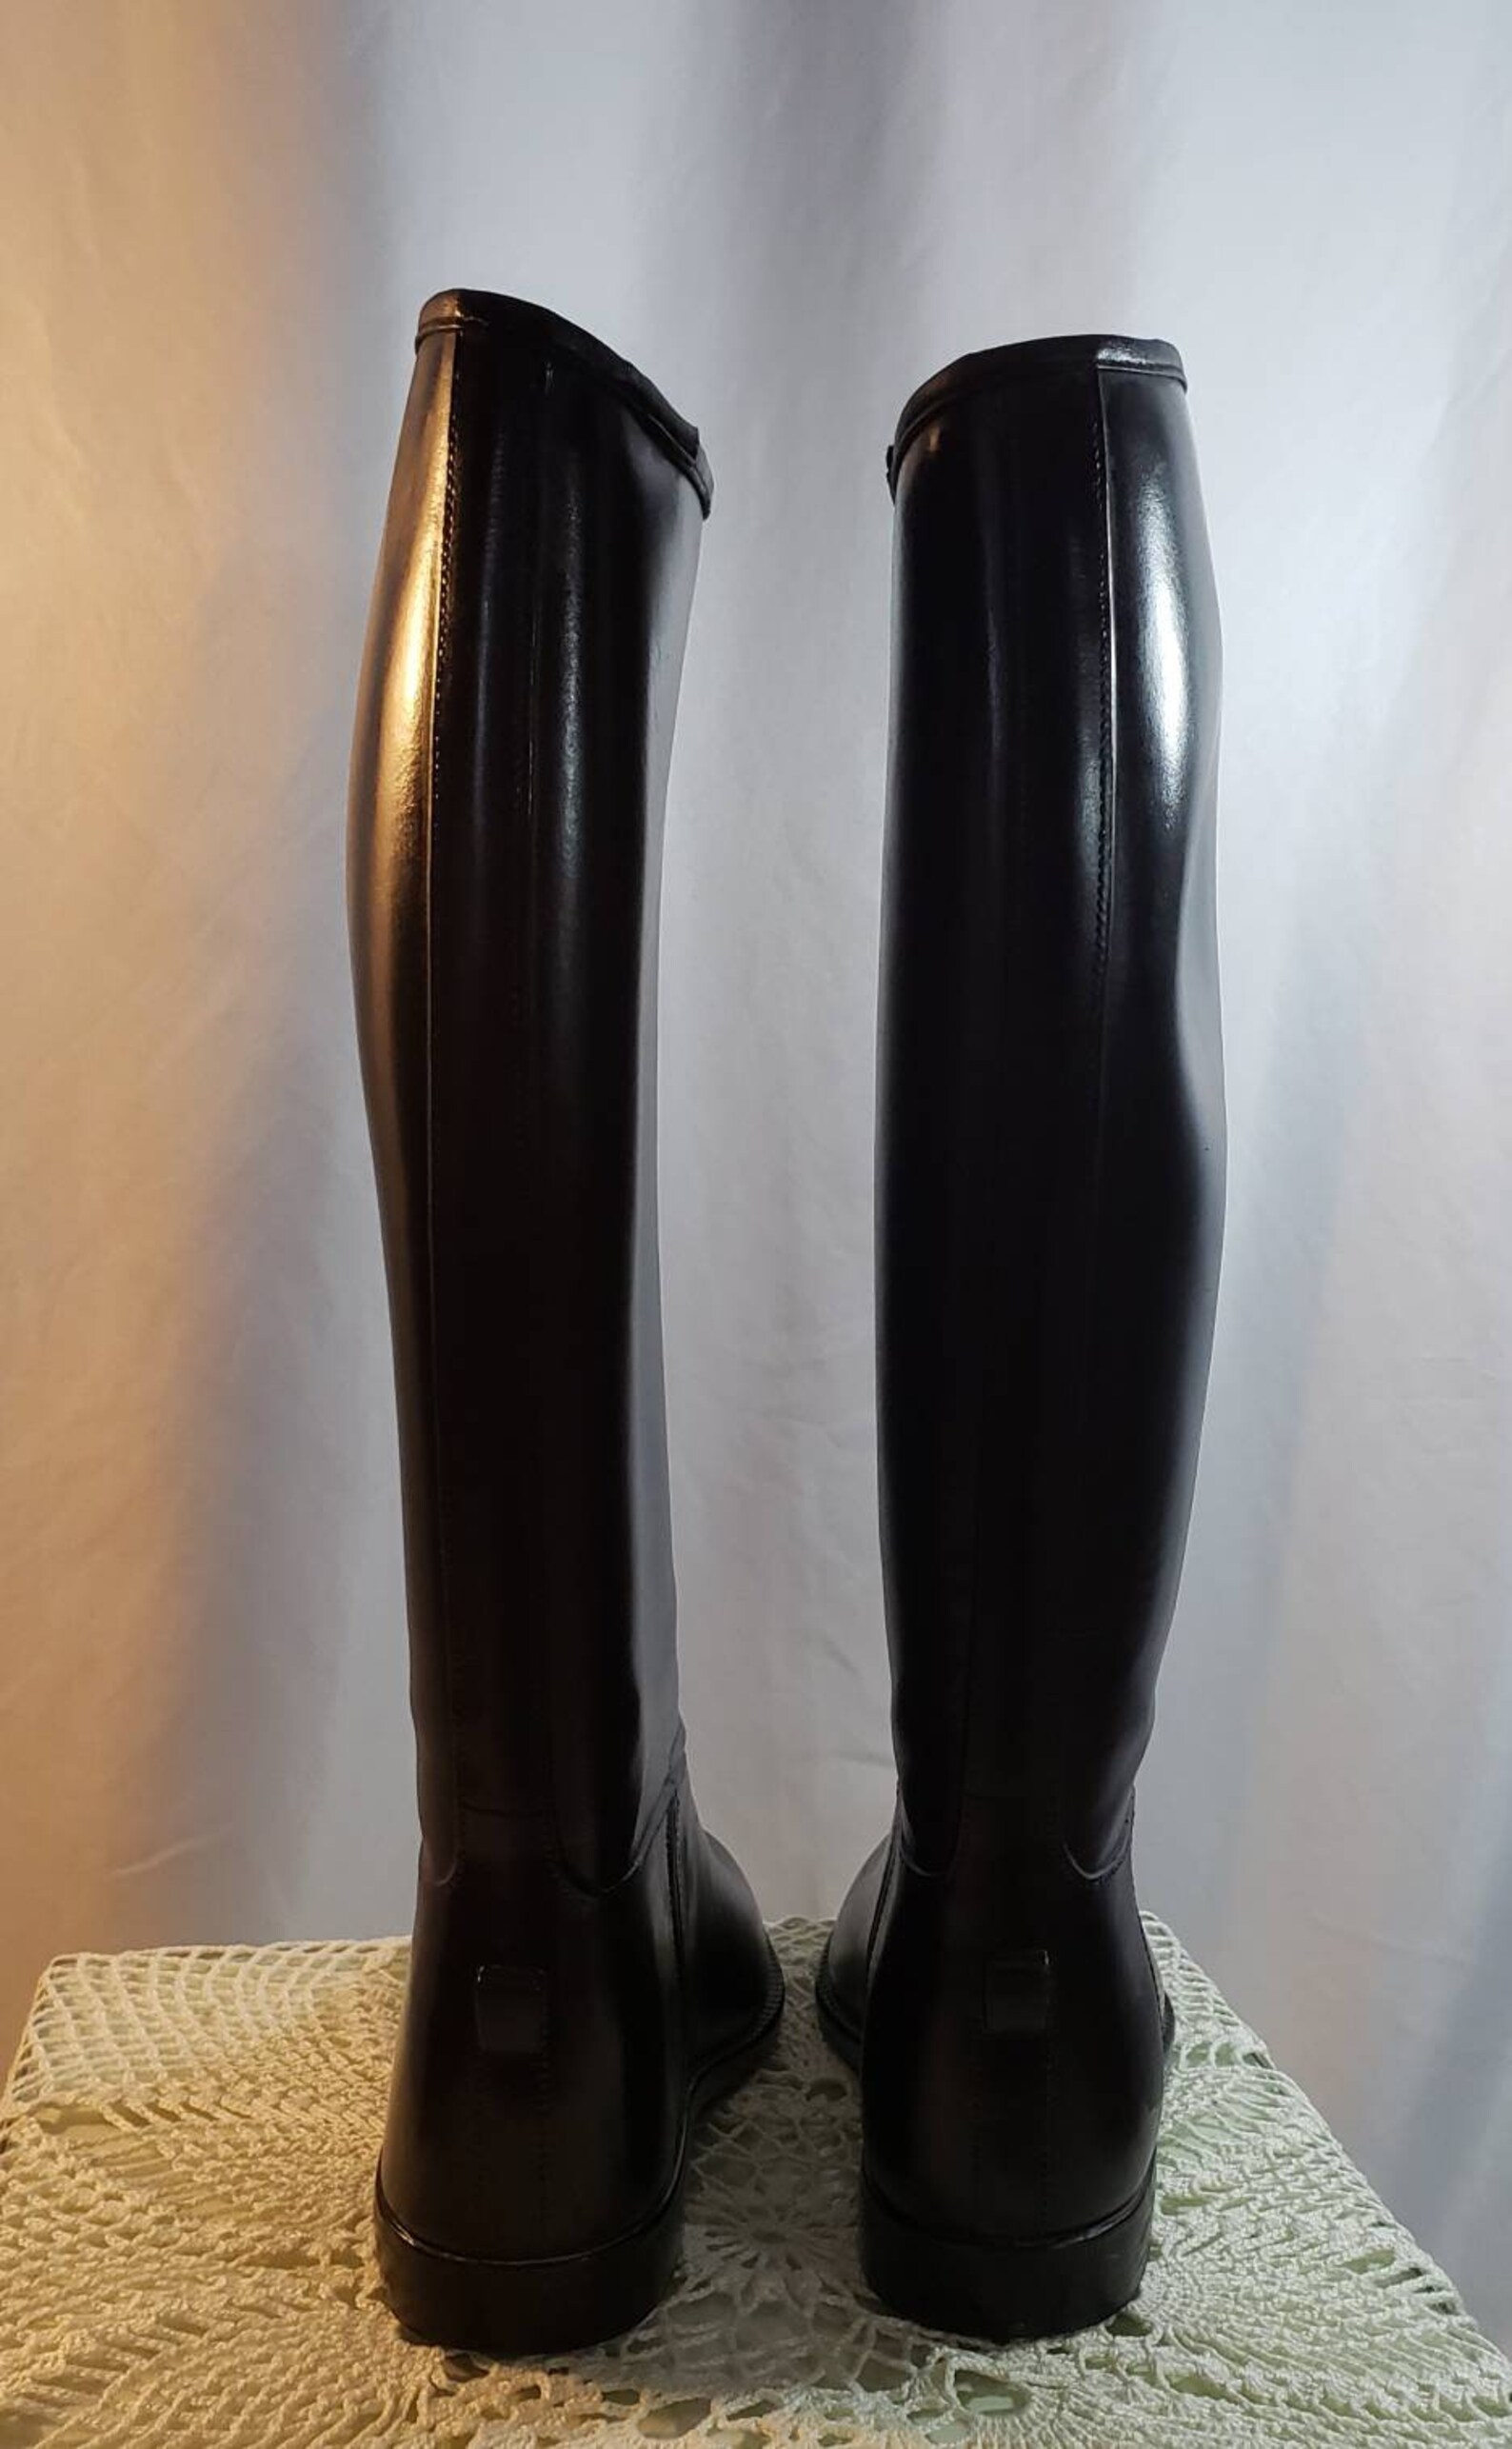 Tall Rubber Riding Boots/Equestrian Wear | Etsy